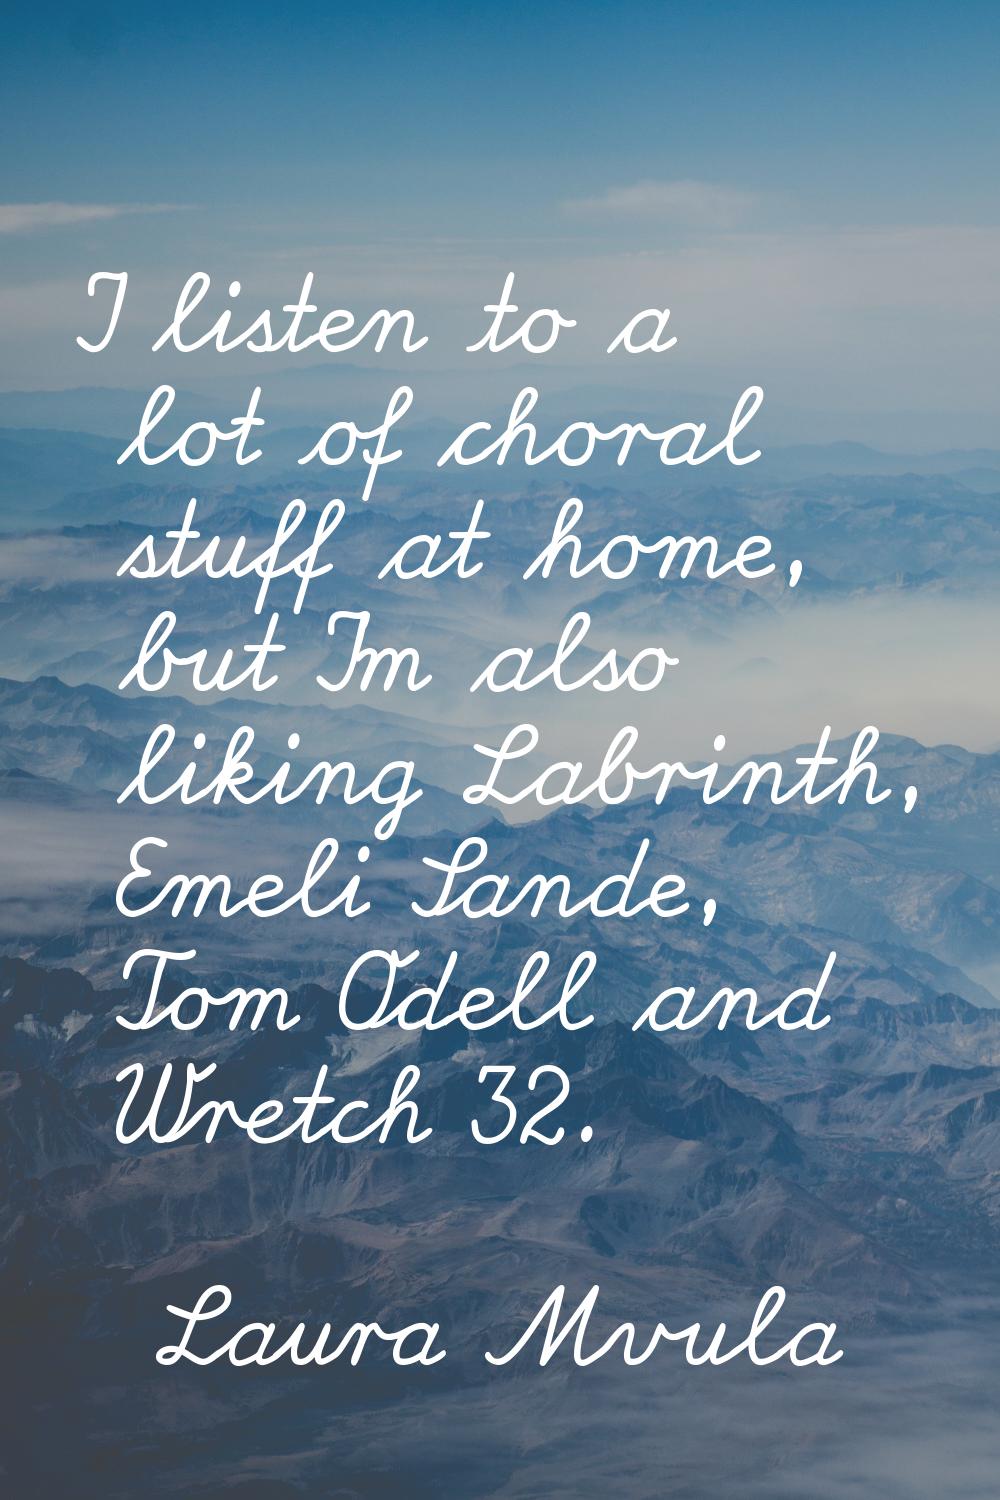 I listen to a lot of choral stuff at home, but I'm also liking Labrinth, Emeli Sande, Tom Odell and